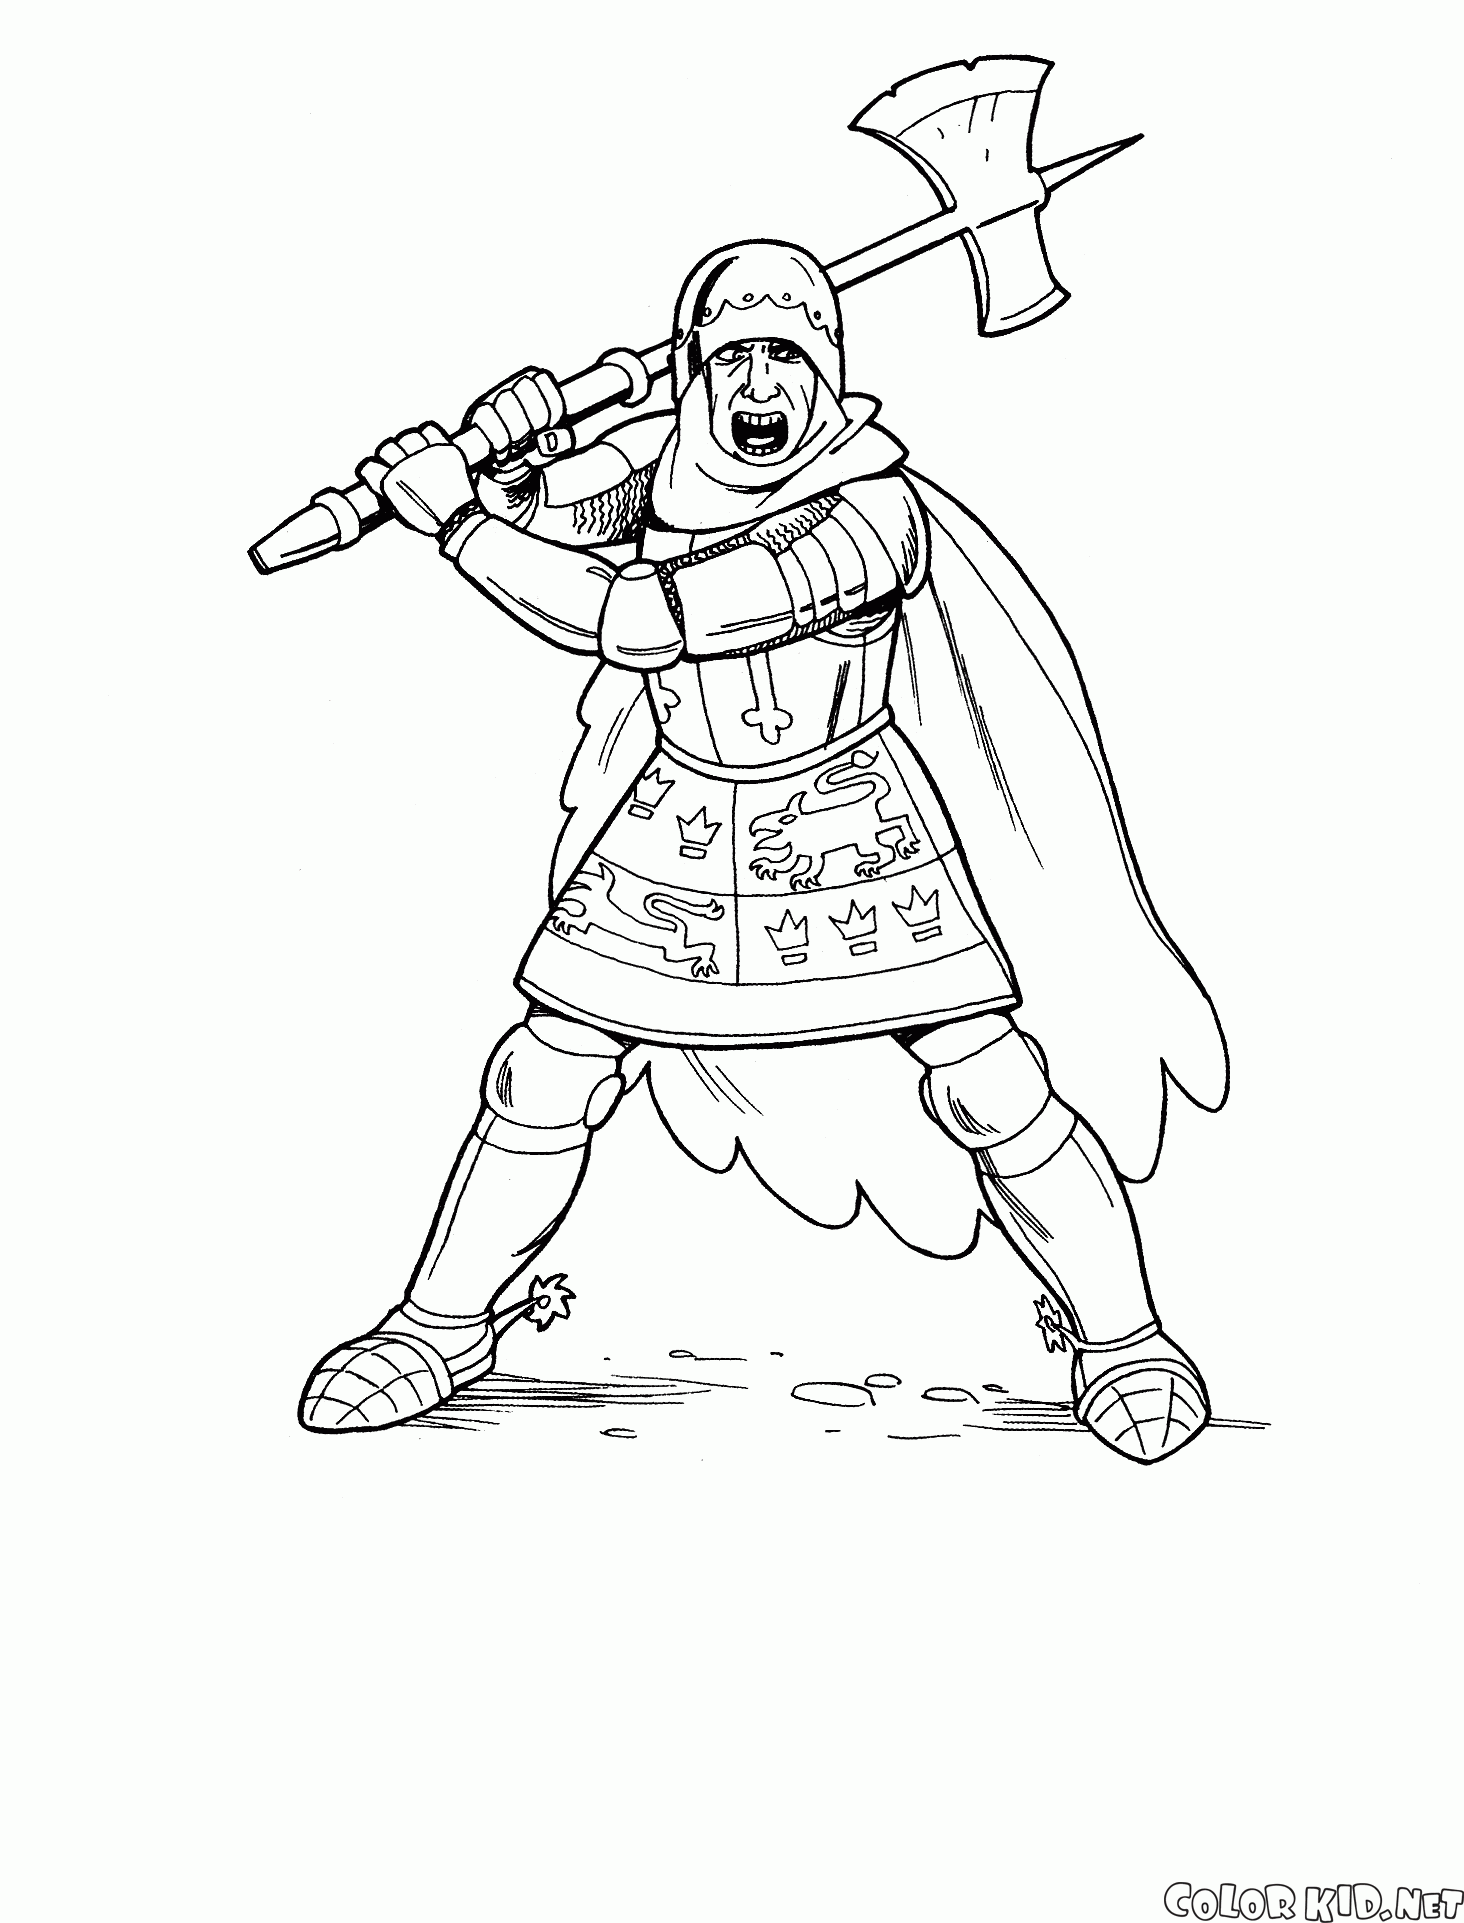 Knight with ax